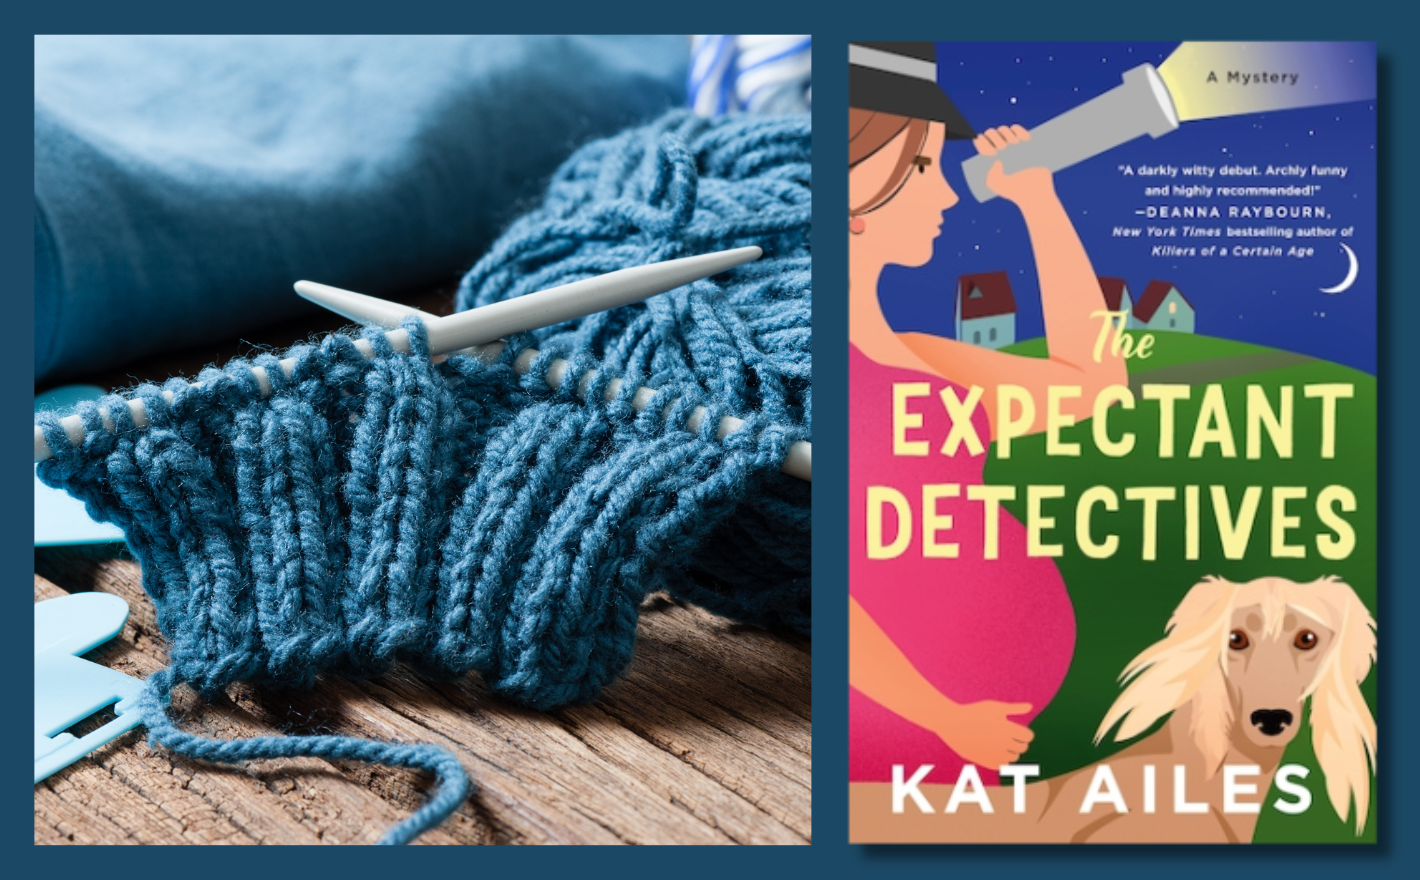 Image of a blue knitting project and the book Expectant Detectives by Kat Ailes